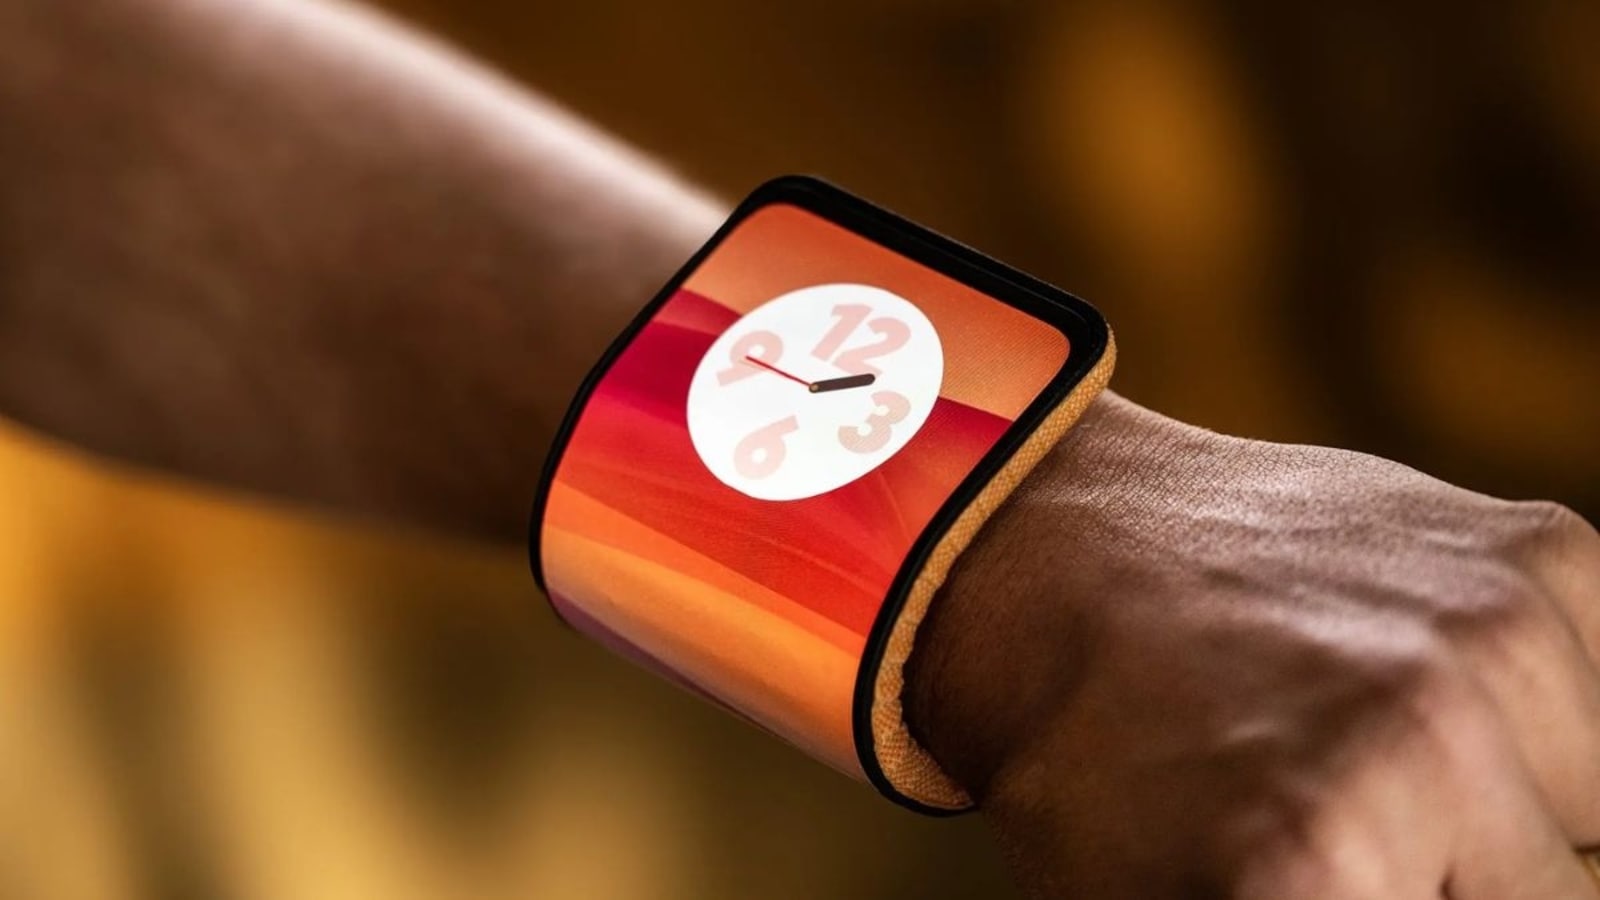 A bending phone for your wrist? Just check out what Motorola rolled out